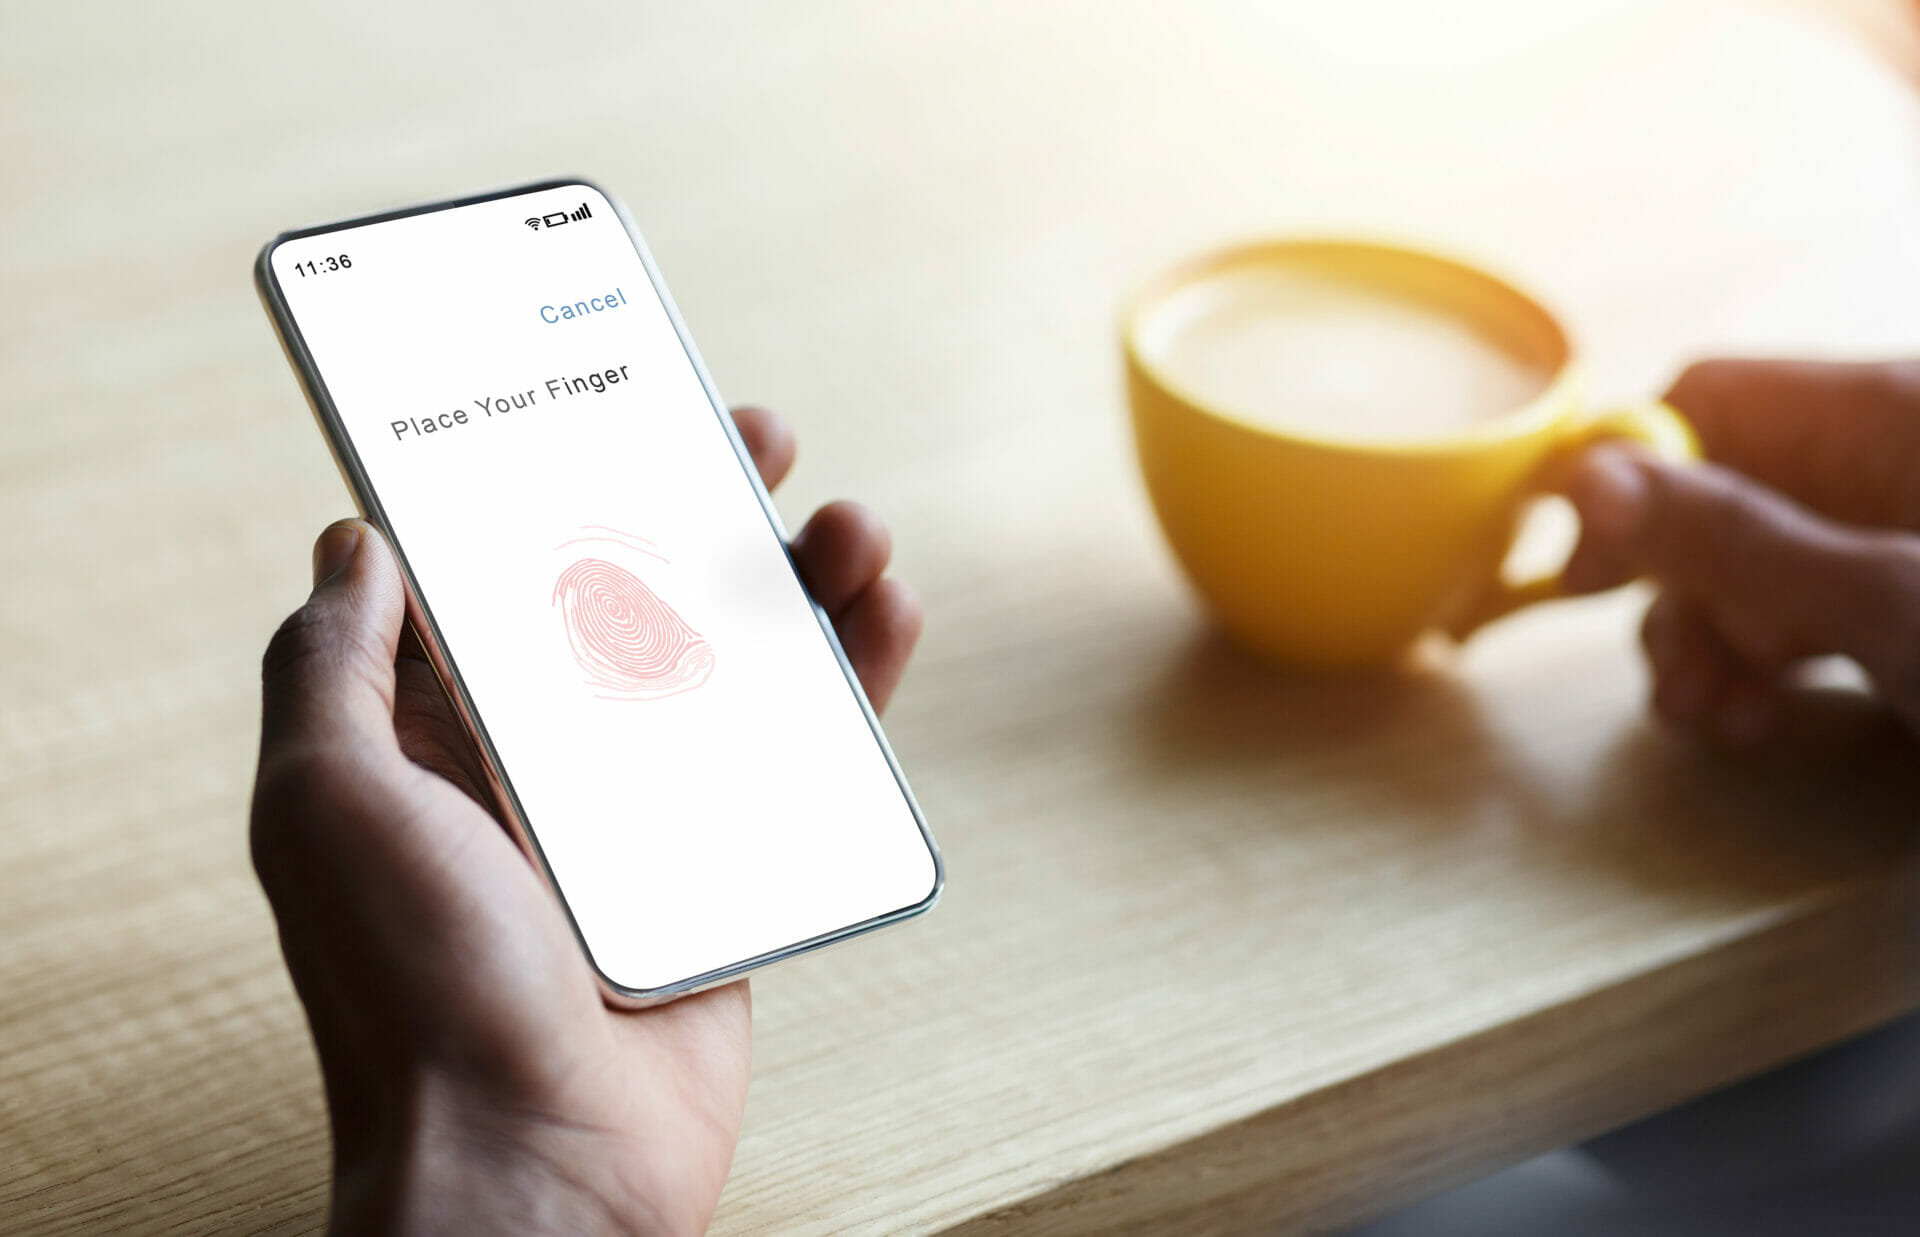 Person Holding Phone With Process Of Scanning With Fingerprint